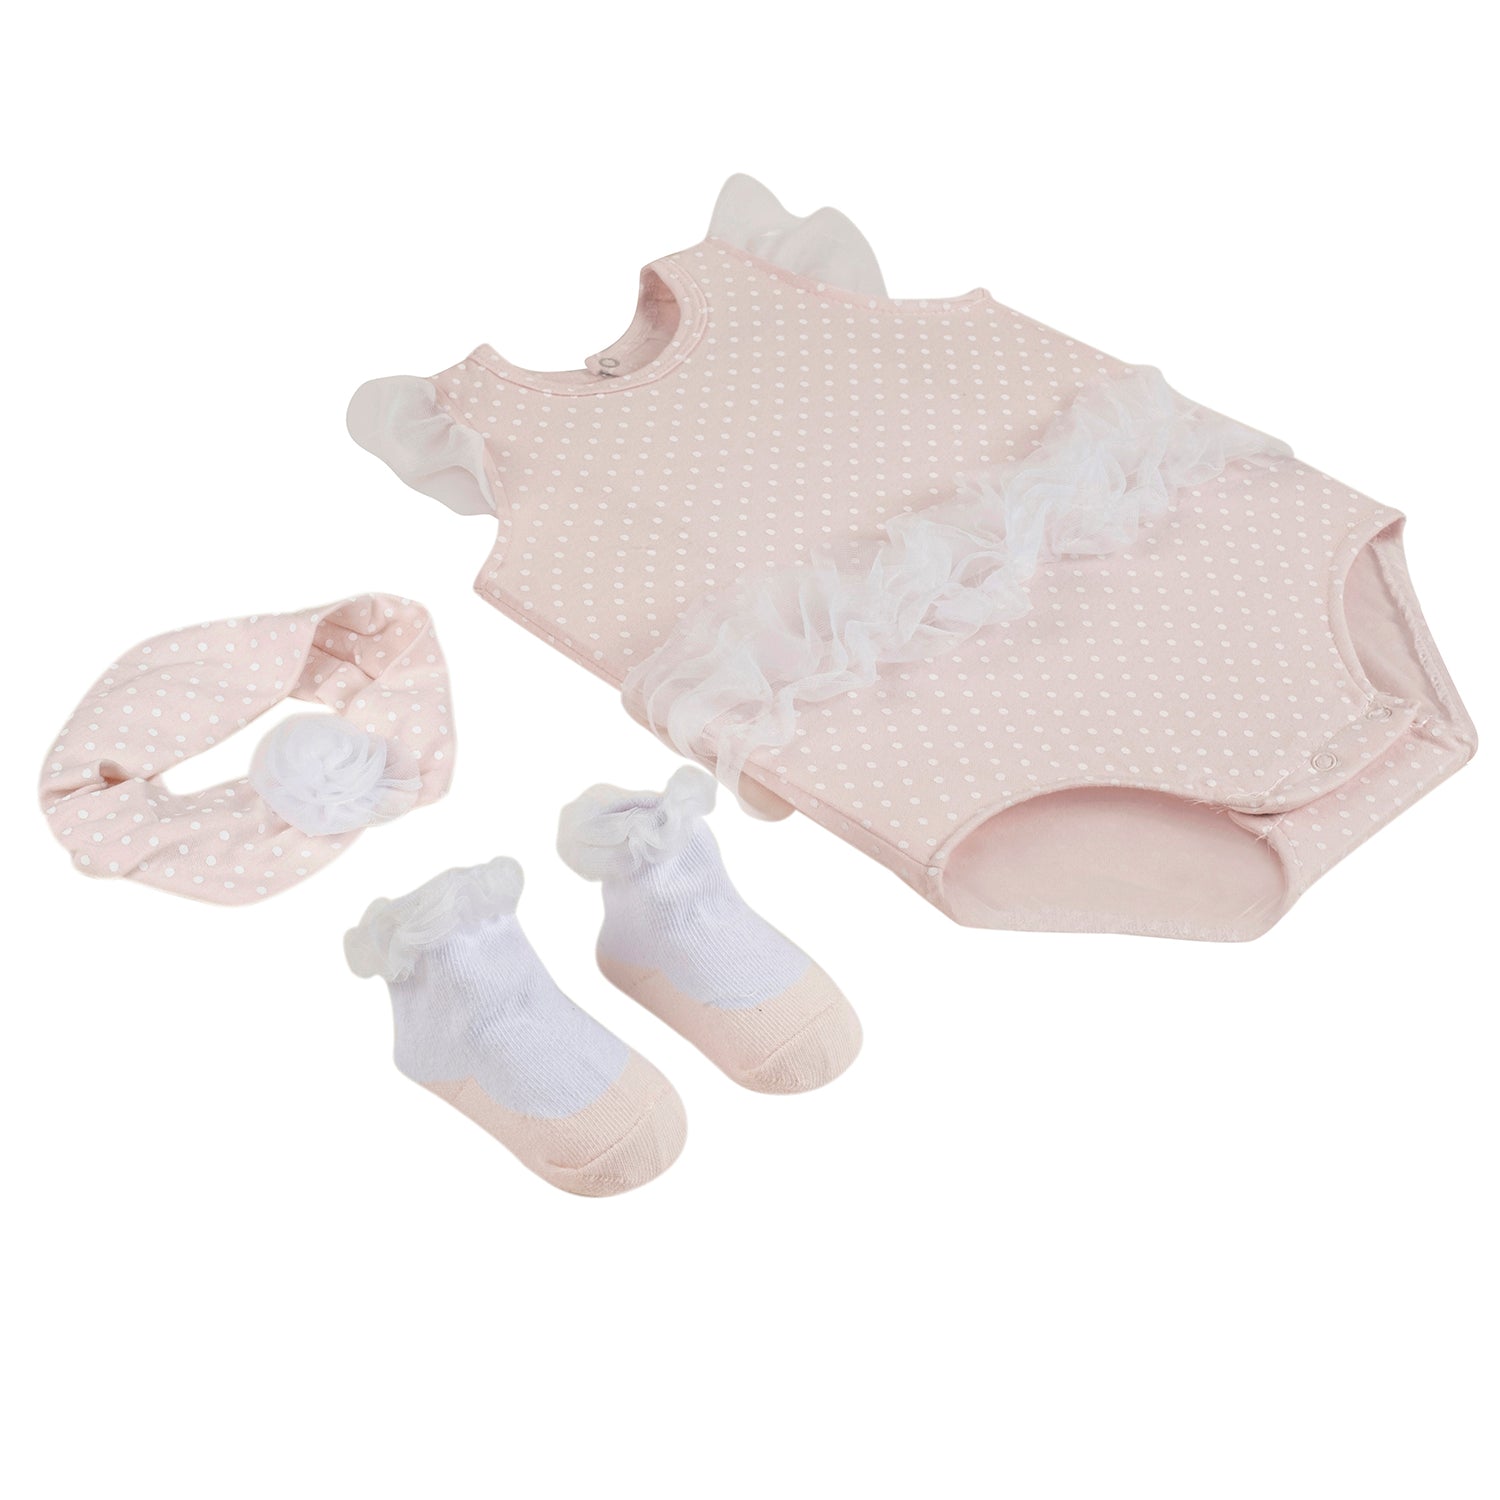 Baby Moo Polka Dotted Gift Set 3 Piece With Bodysuit, Socks And Headband - Peach